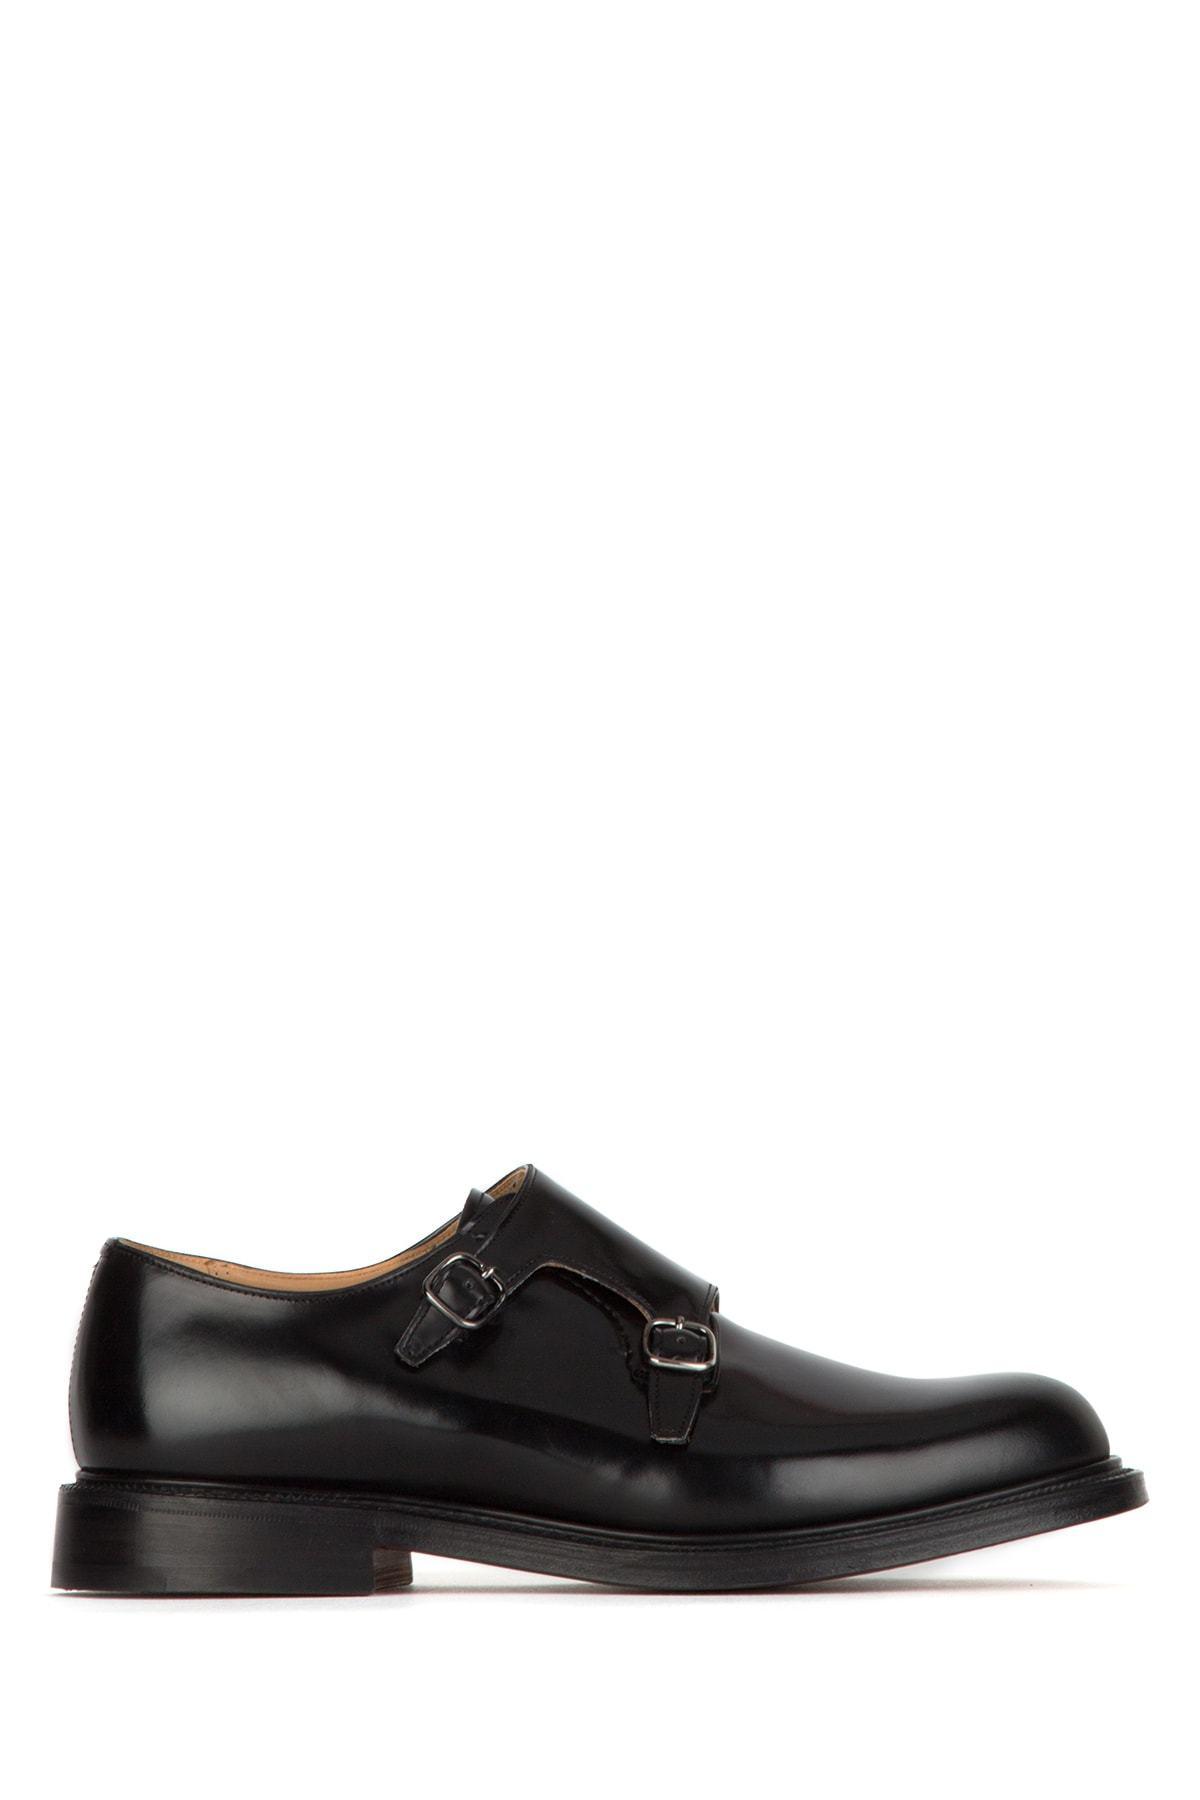 Church's Leather Double Monk Strap Shoes in Black for Men - Lyst